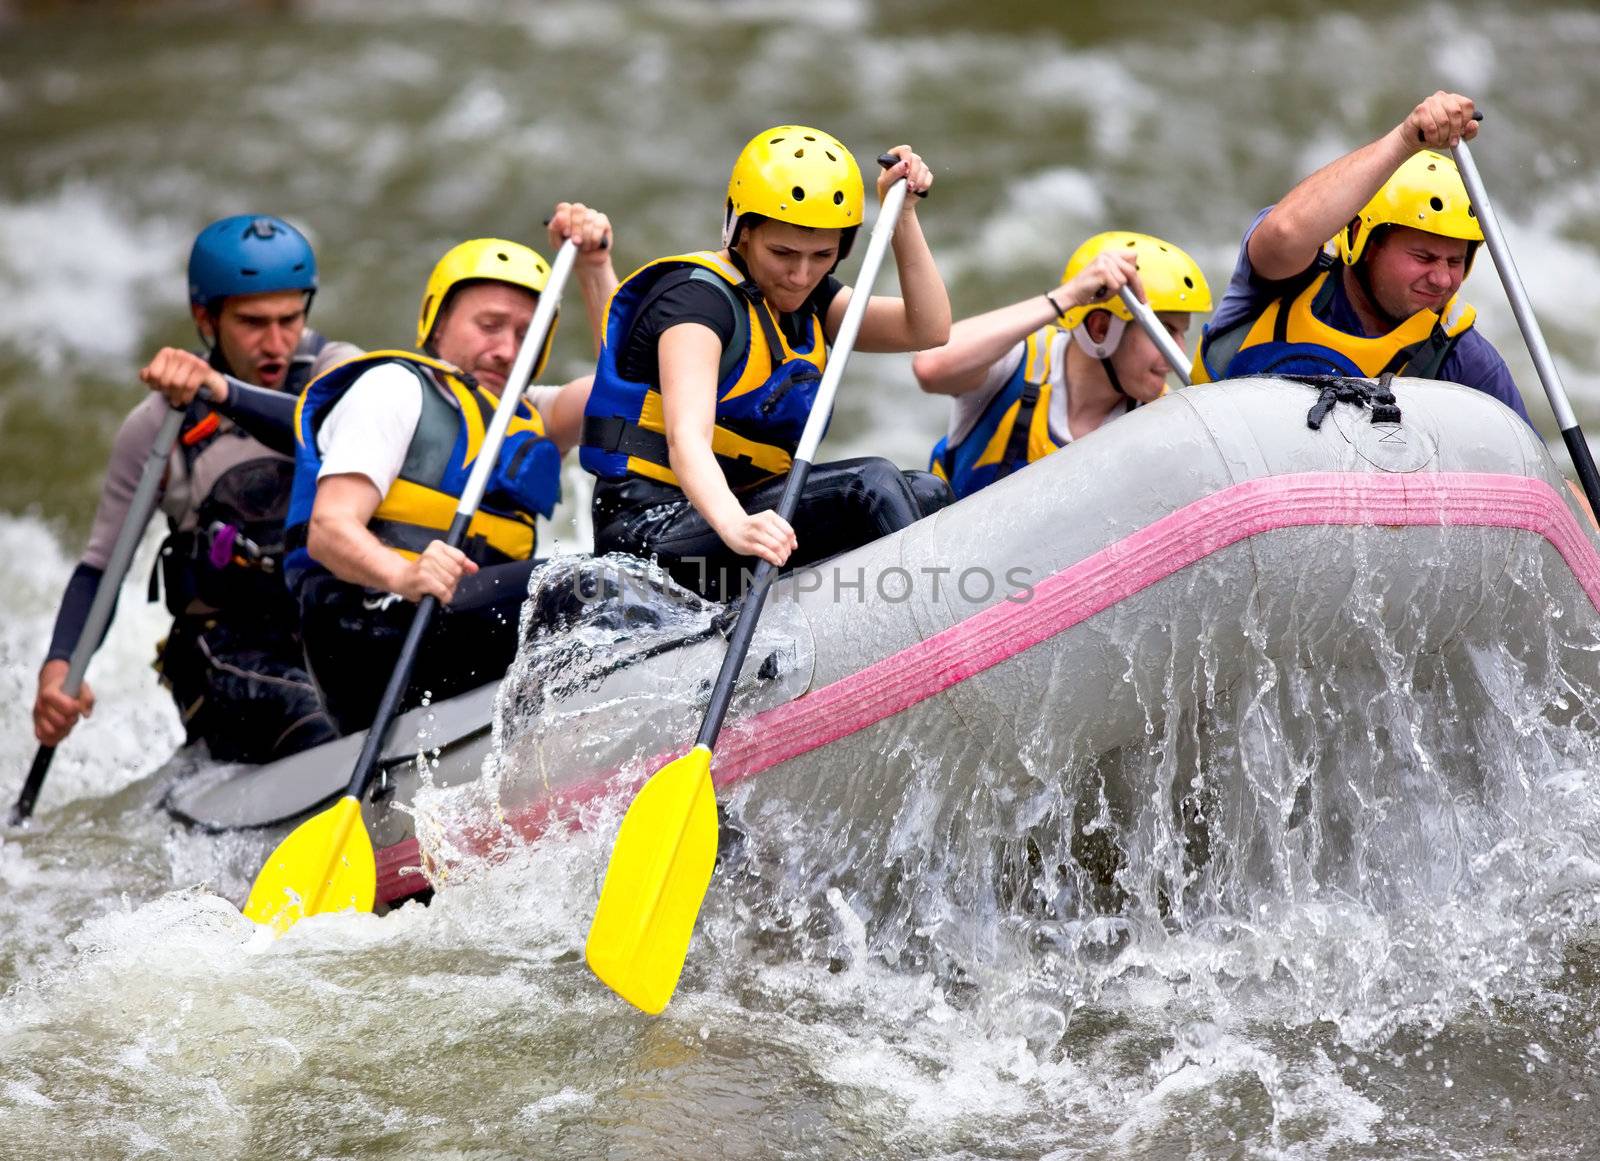 Group of people whitewater rafting on a river